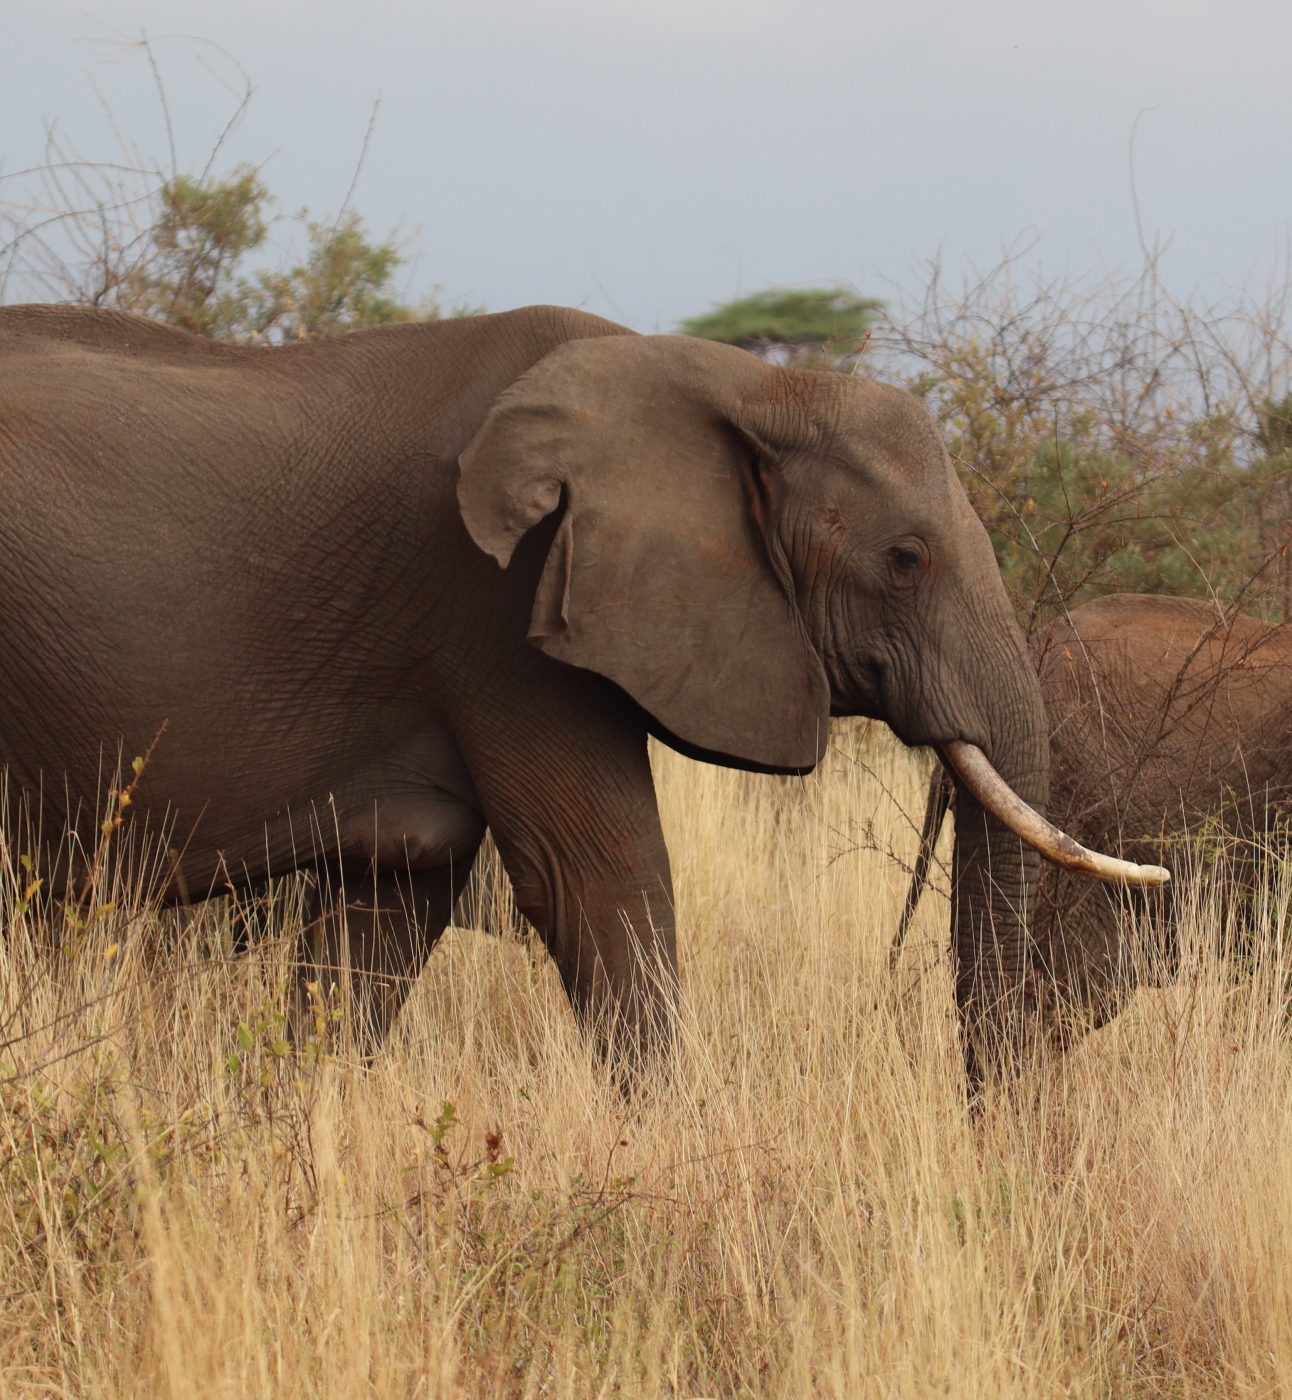 An adult and young elephant grazing in grassland